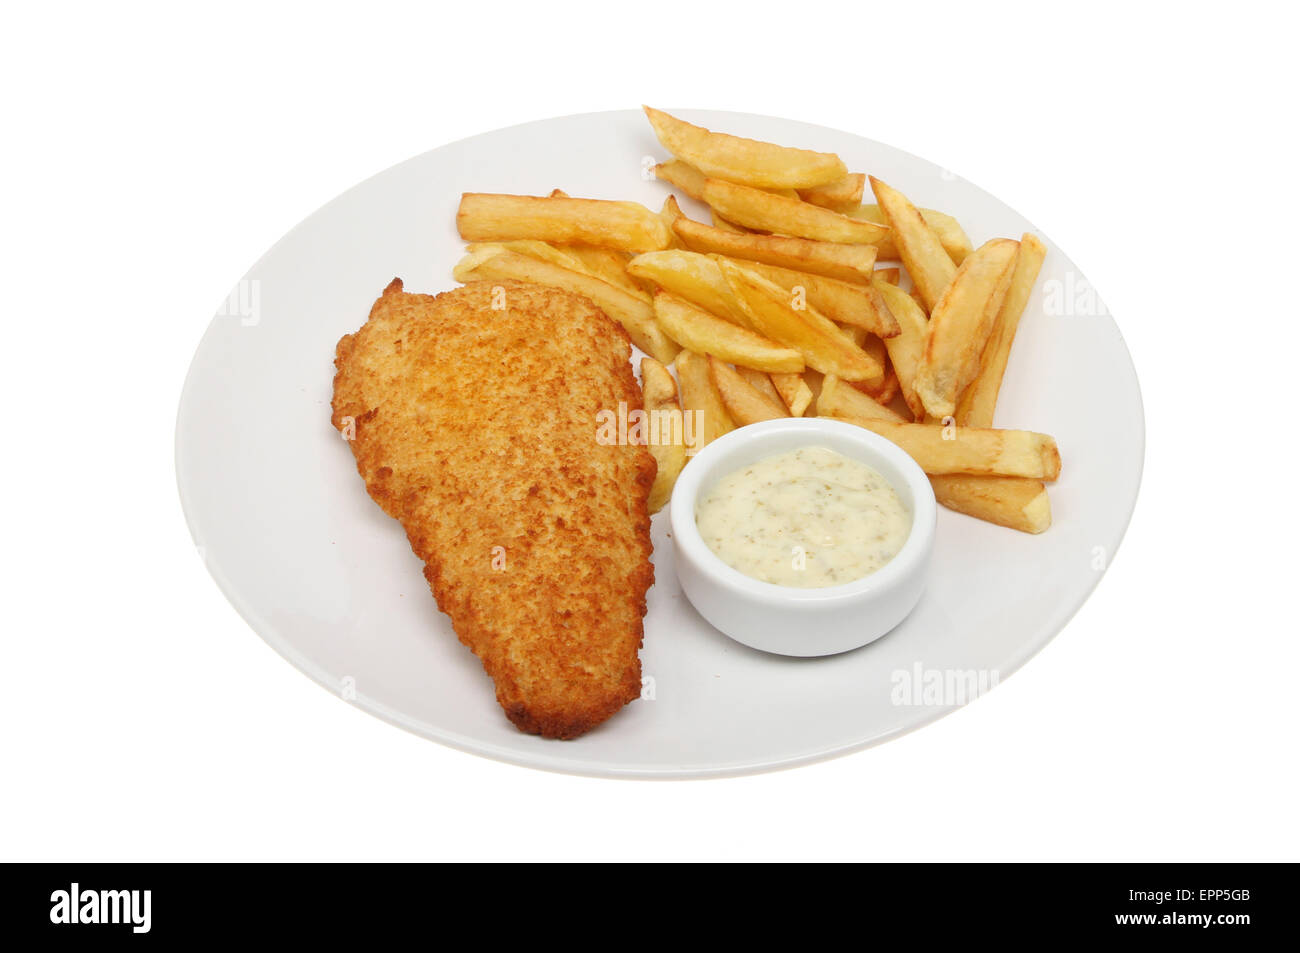 battered fish with chips and tartar sauce on a plate isolated against white Stock Photo